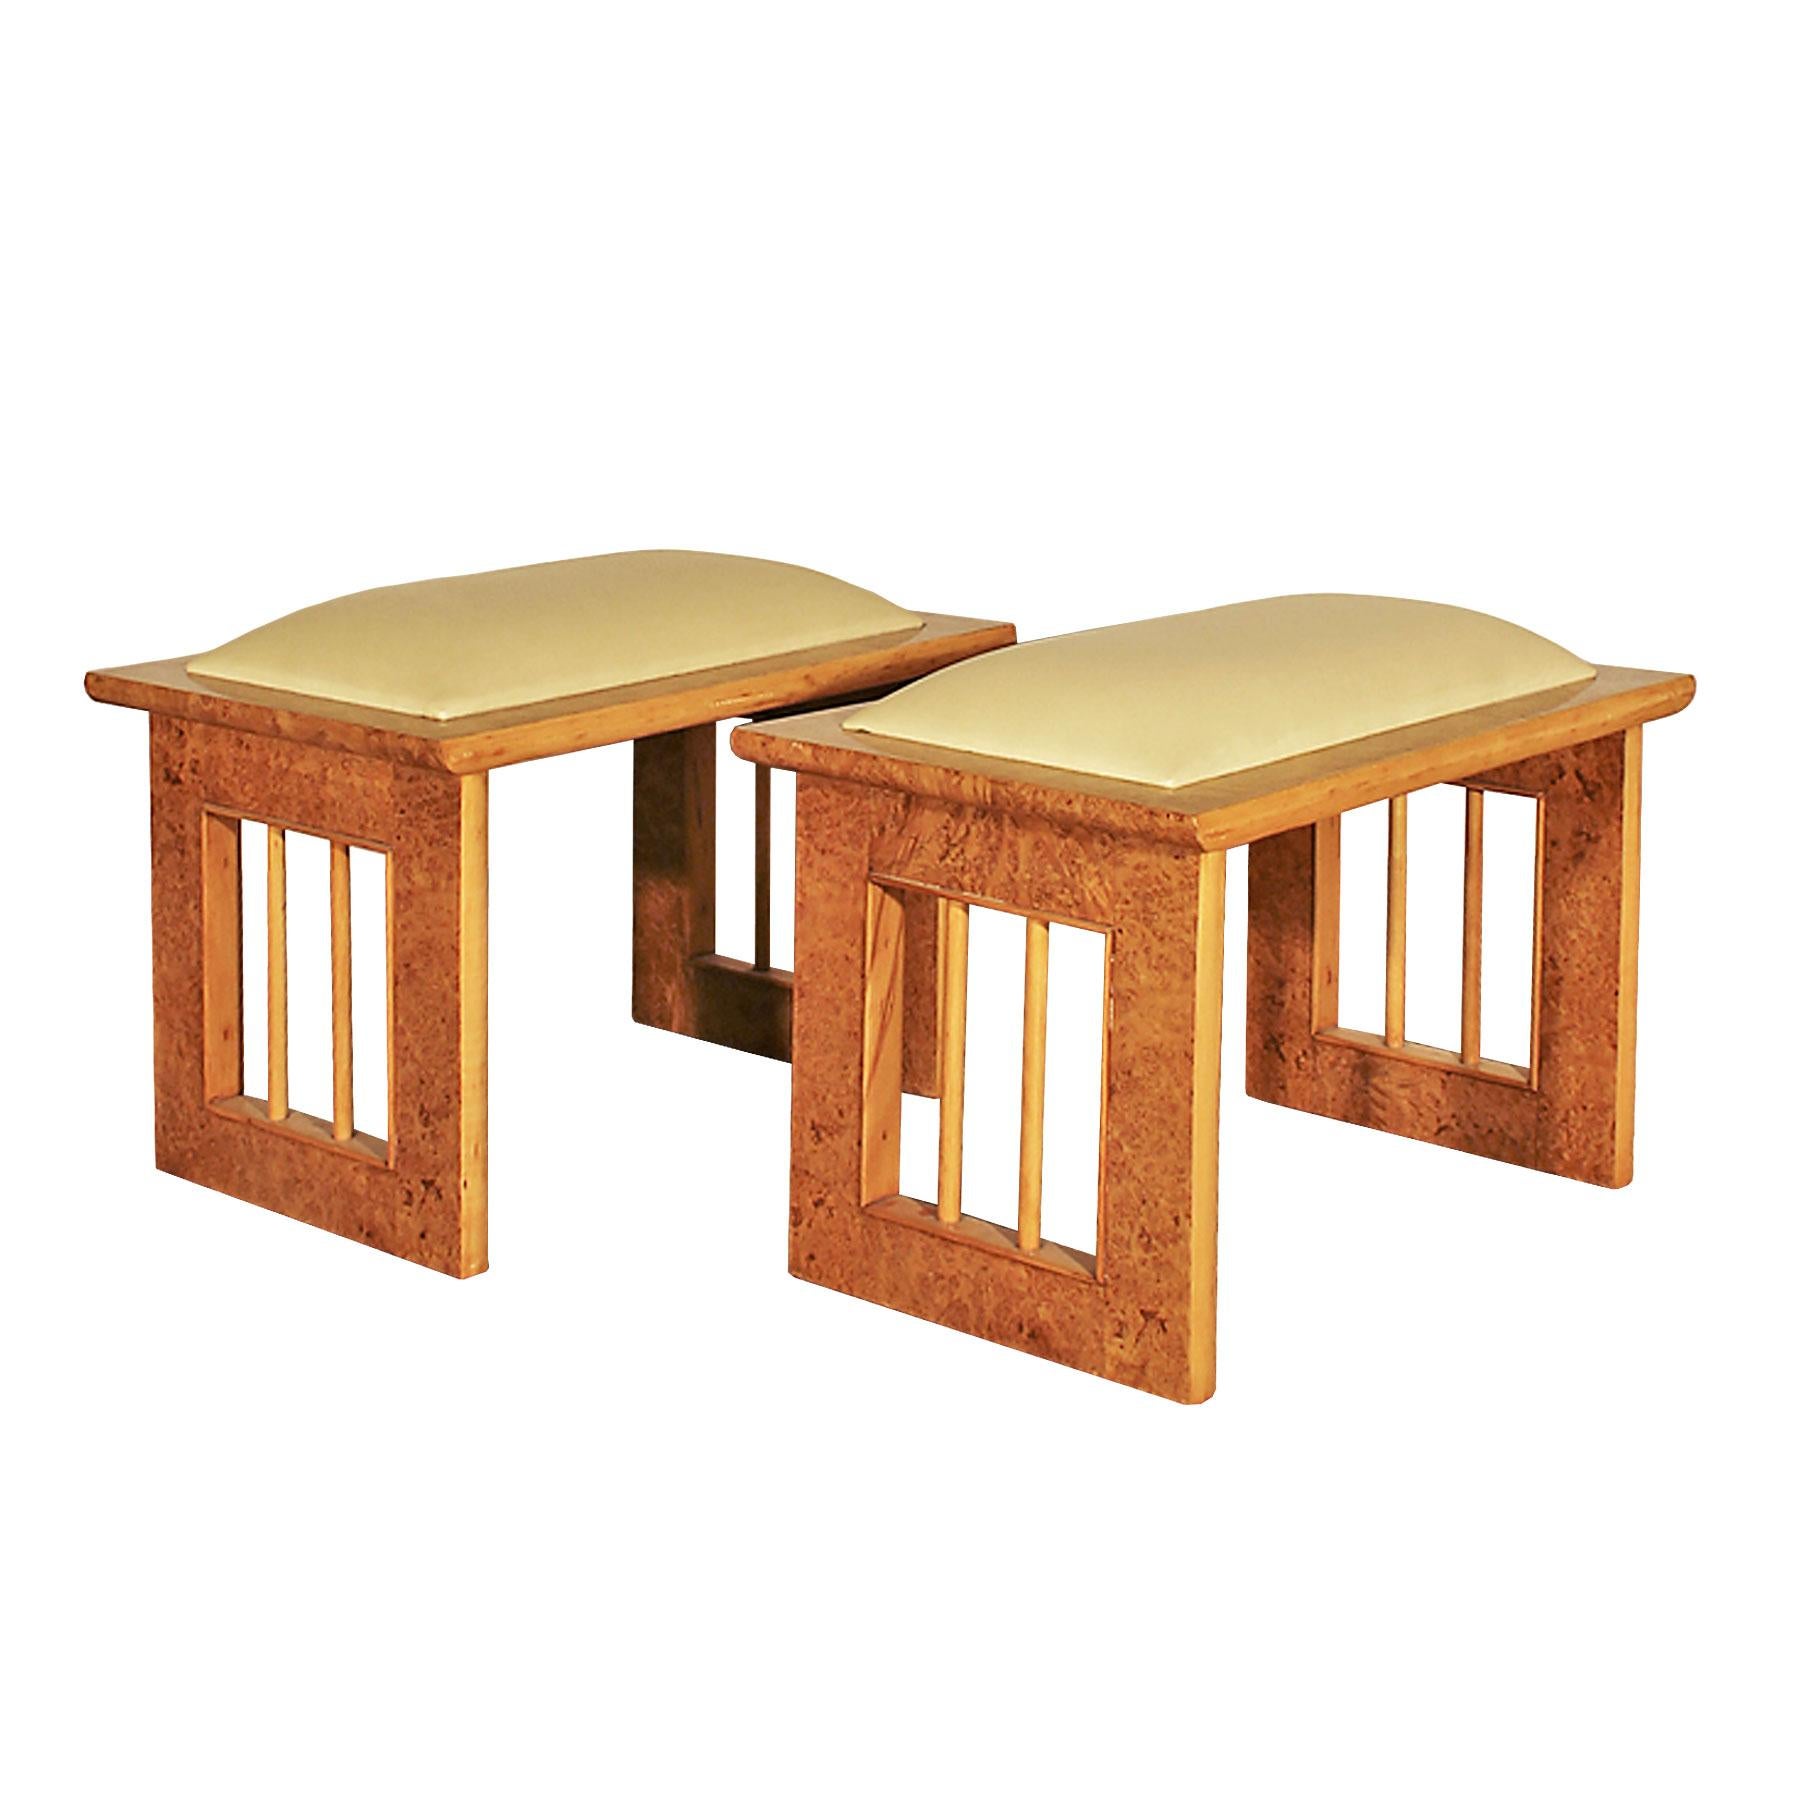 Italian 1930s Pair of Art Deco Stools in Maple, Elm and Leather - Italy For Sale